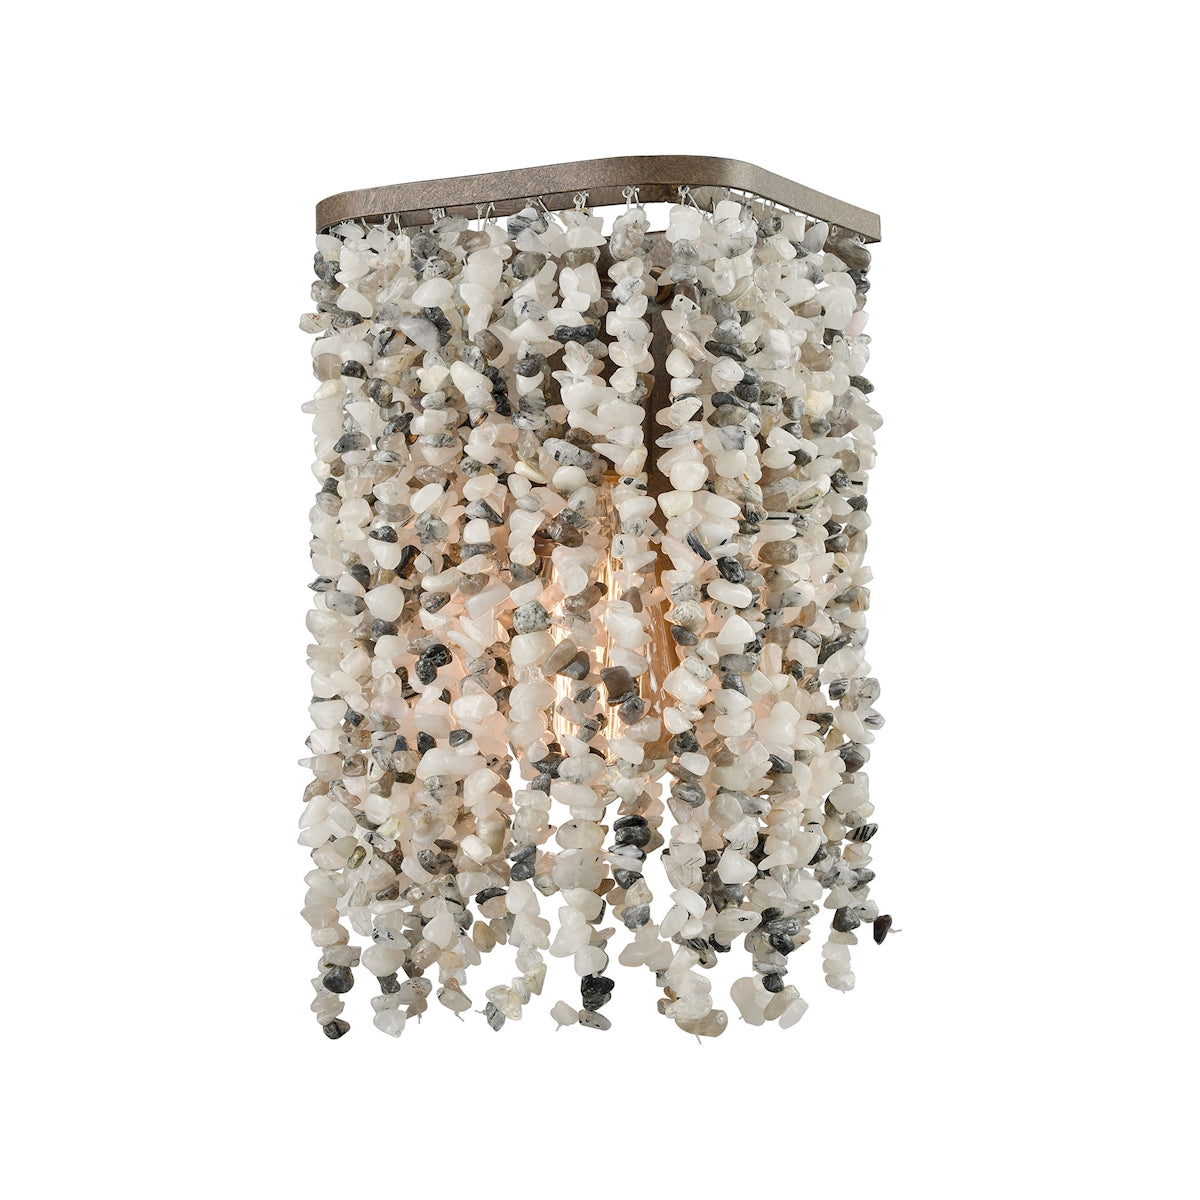 ELK Lighting 65300/1 Agate Stones 1-Light Vanity Sconce in Weathered Bronze with Agate Stones